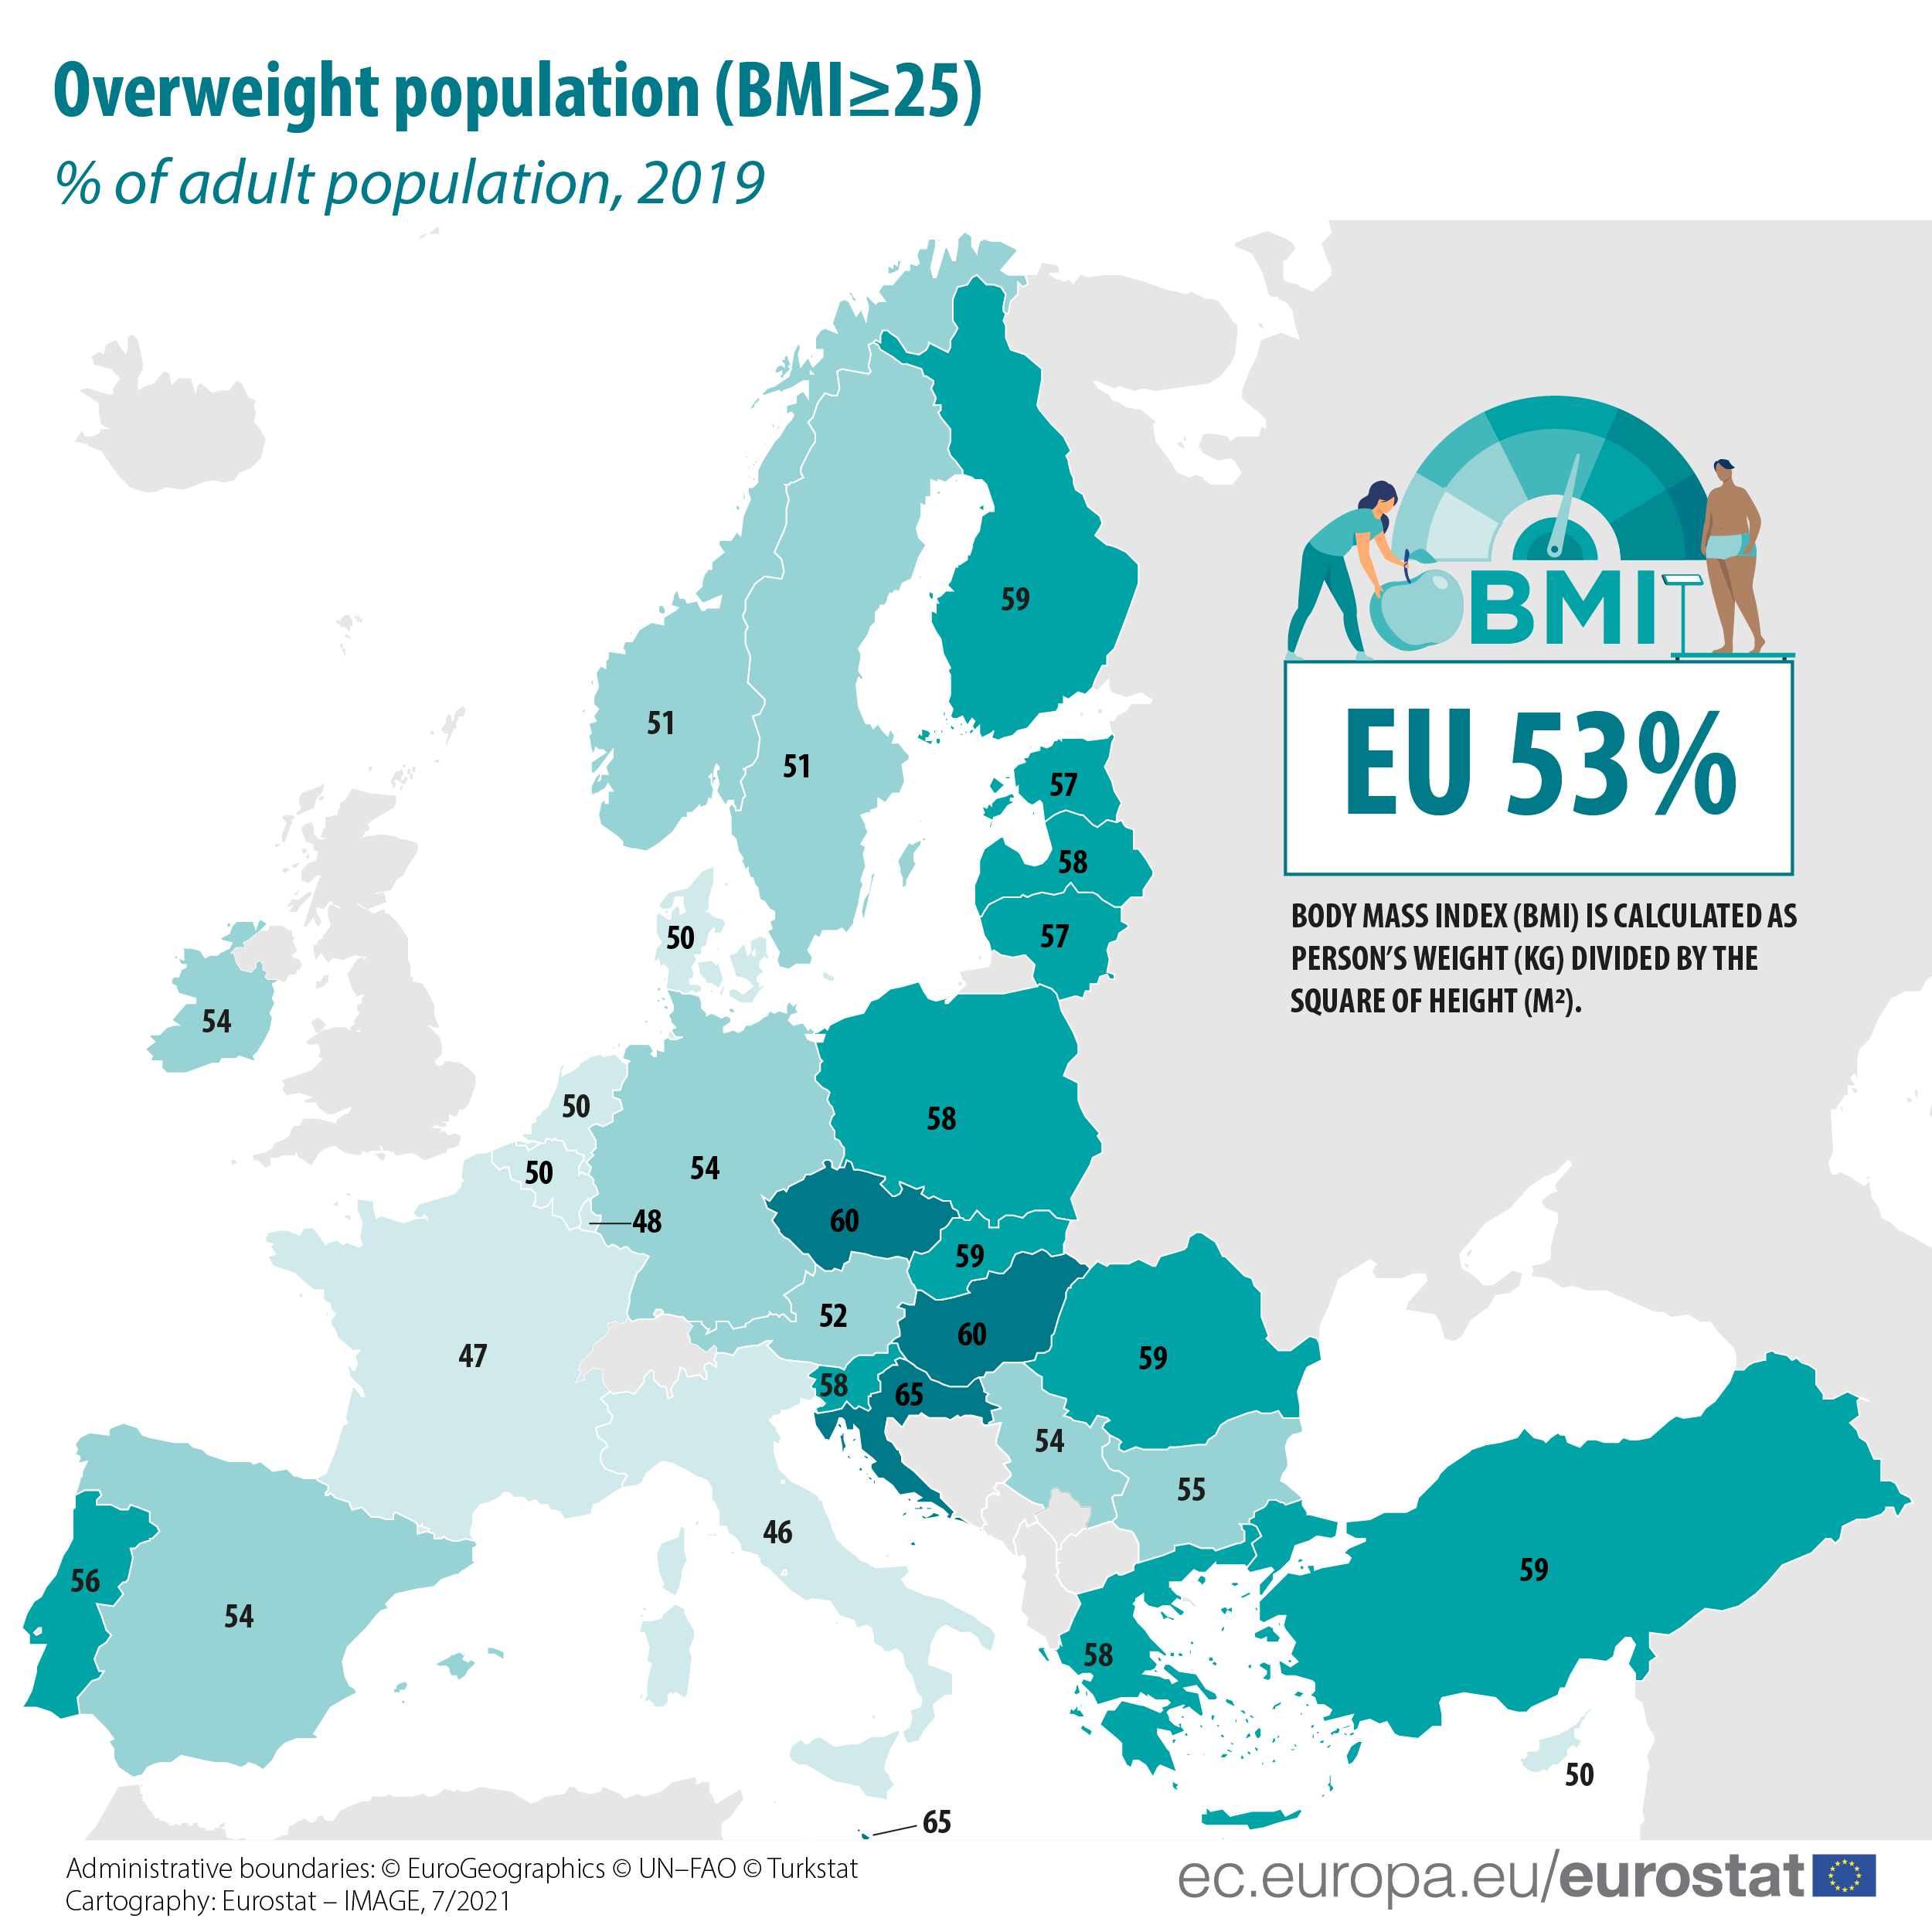 Map: Share of overweight adults in 2019, in EU/EFTA countries with available data